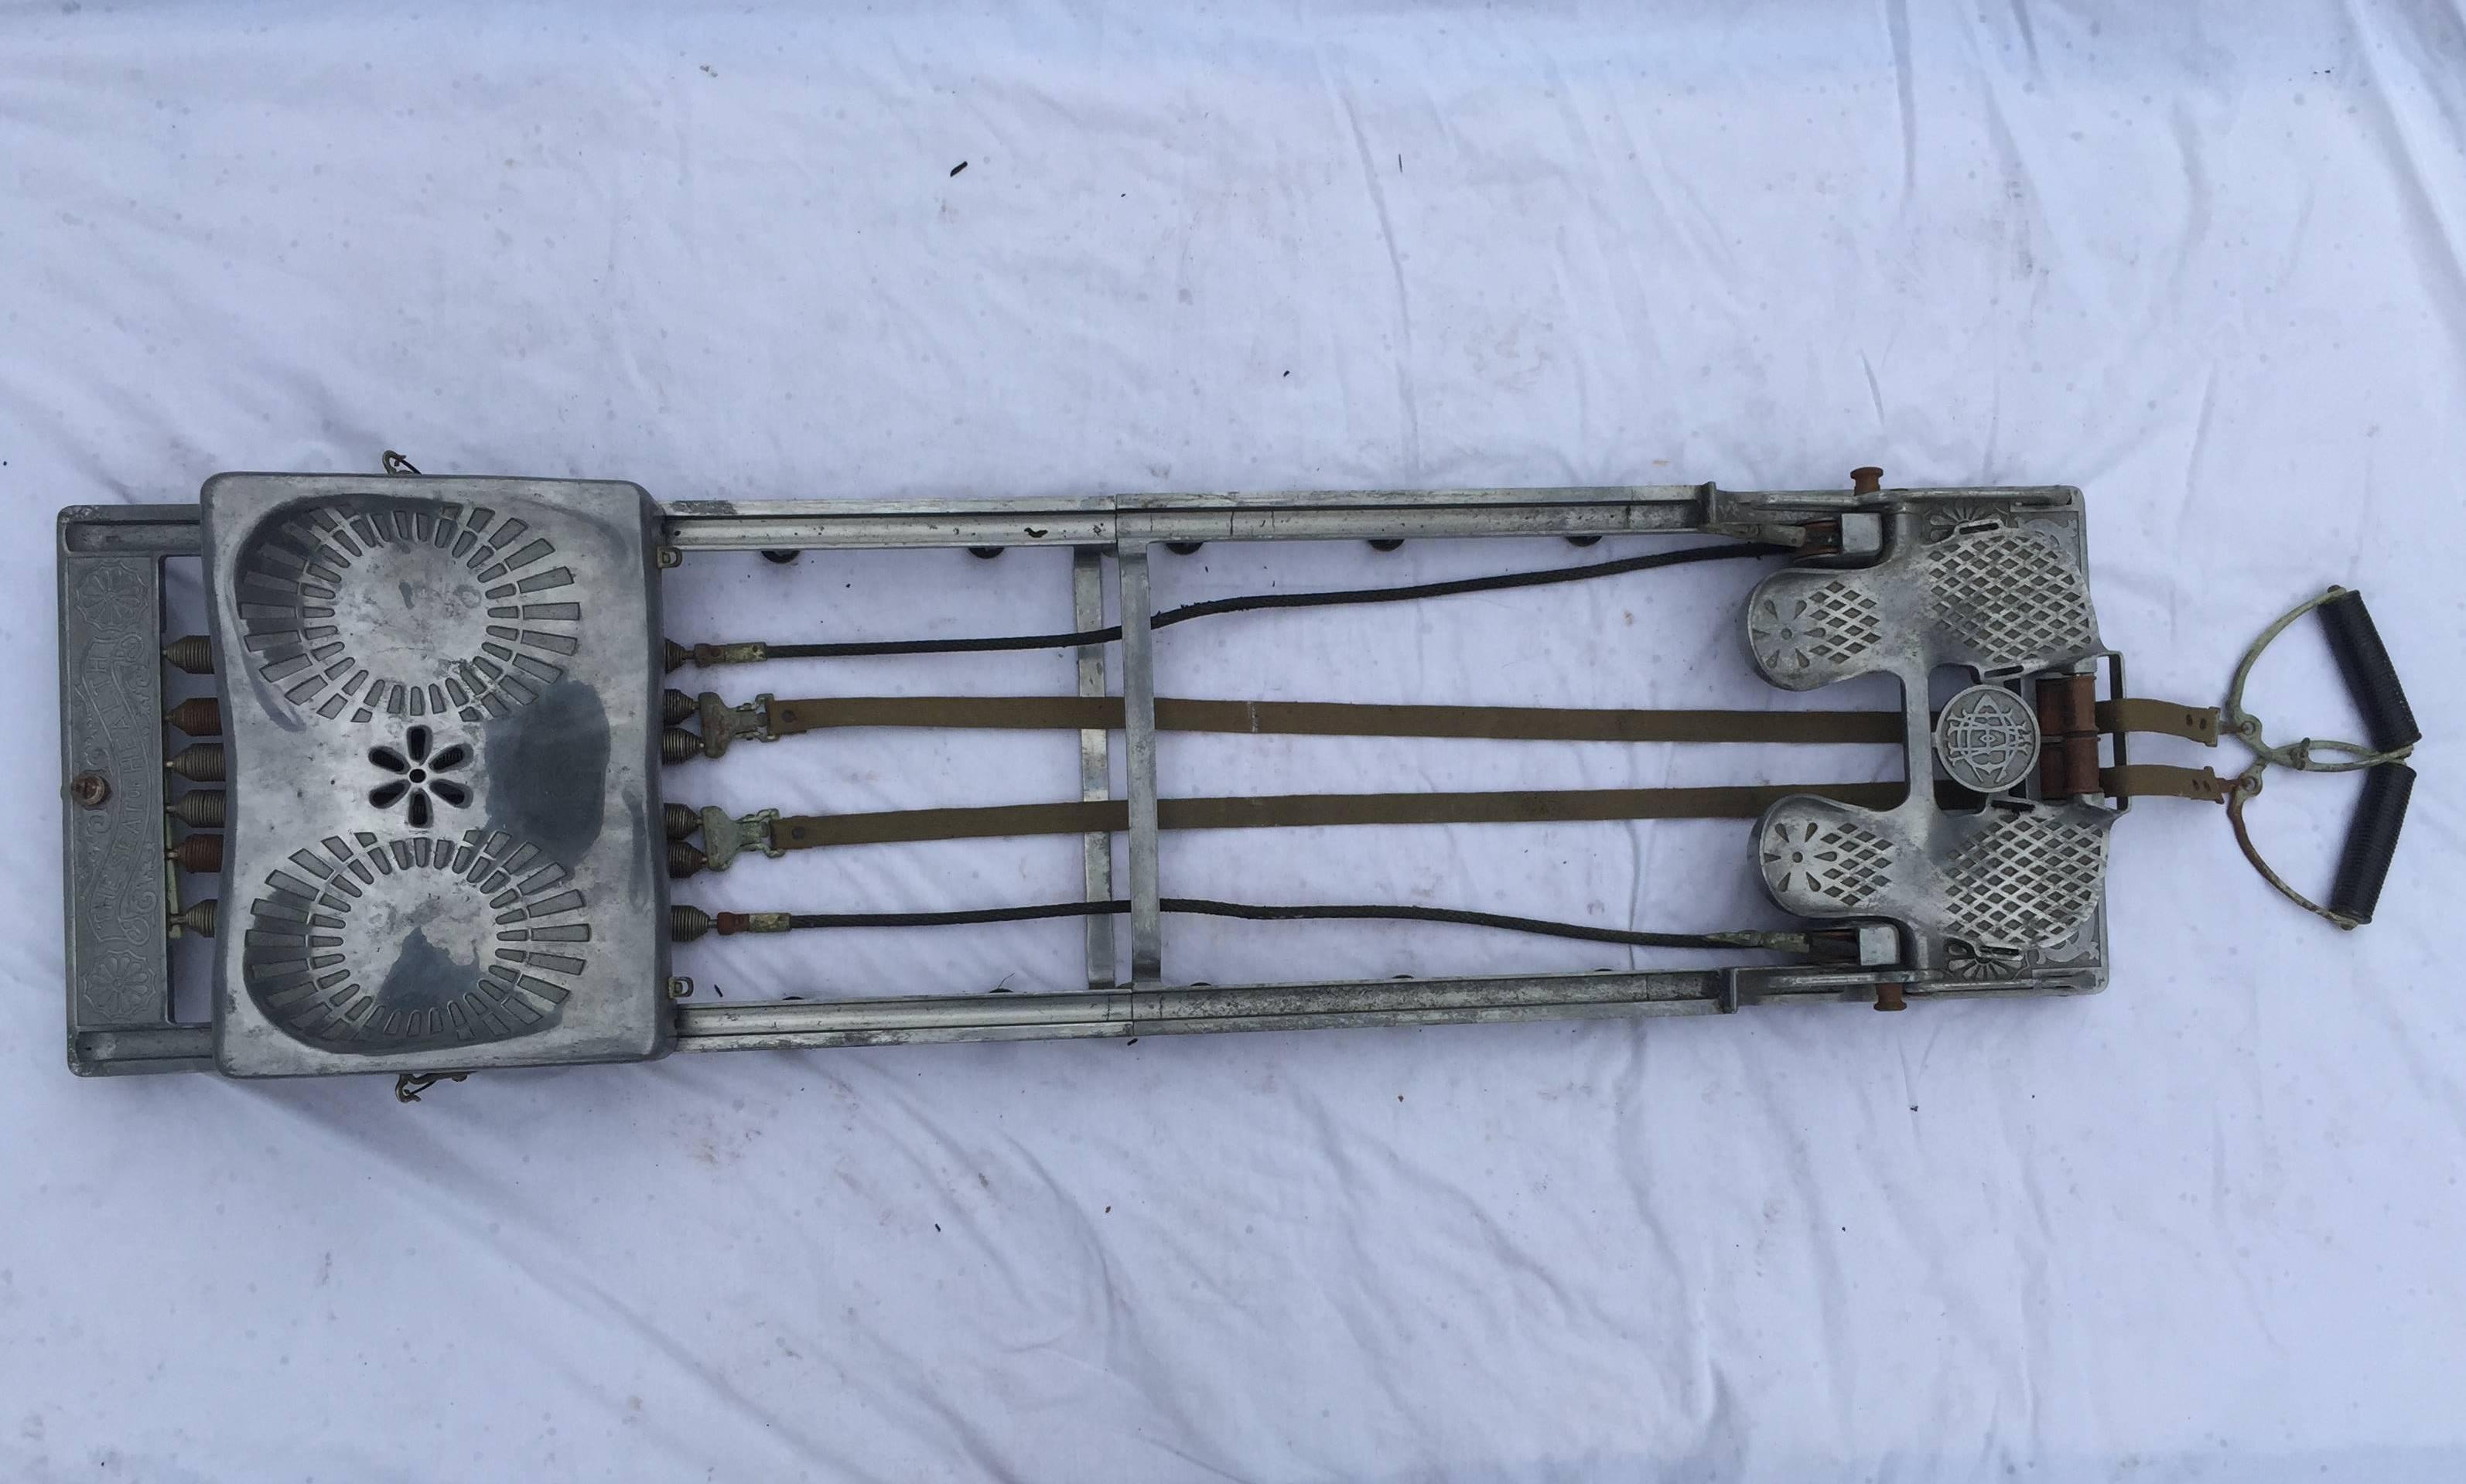 The Health Developing Apparatus Co of Bridgeport, Connecticut created The Seat of Health rowing machine in aluminum with a decidedly Industrial style. This machine dates to the early 20th century, circa 1930s and is in fair to good condition. The